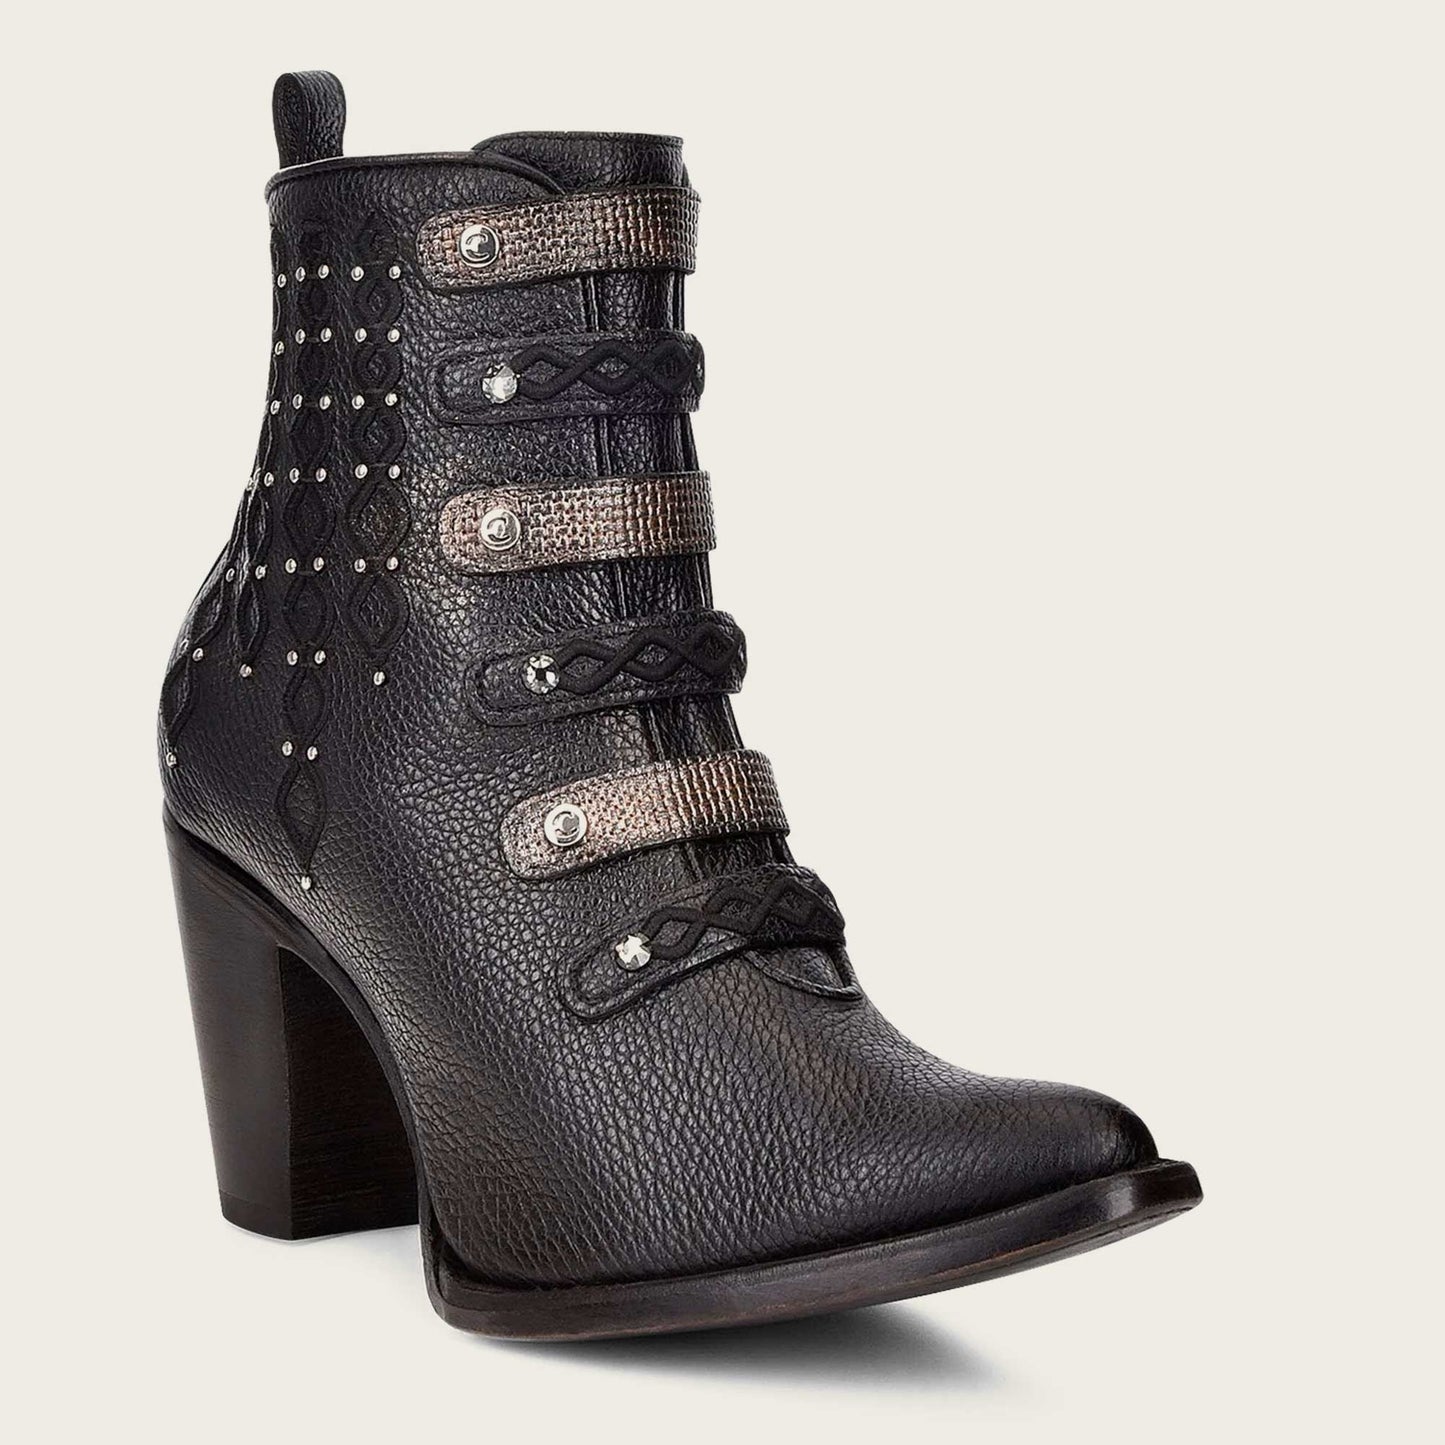 An image of a black leather bootie with intricate embroidery details and sparkling Austrian crystals